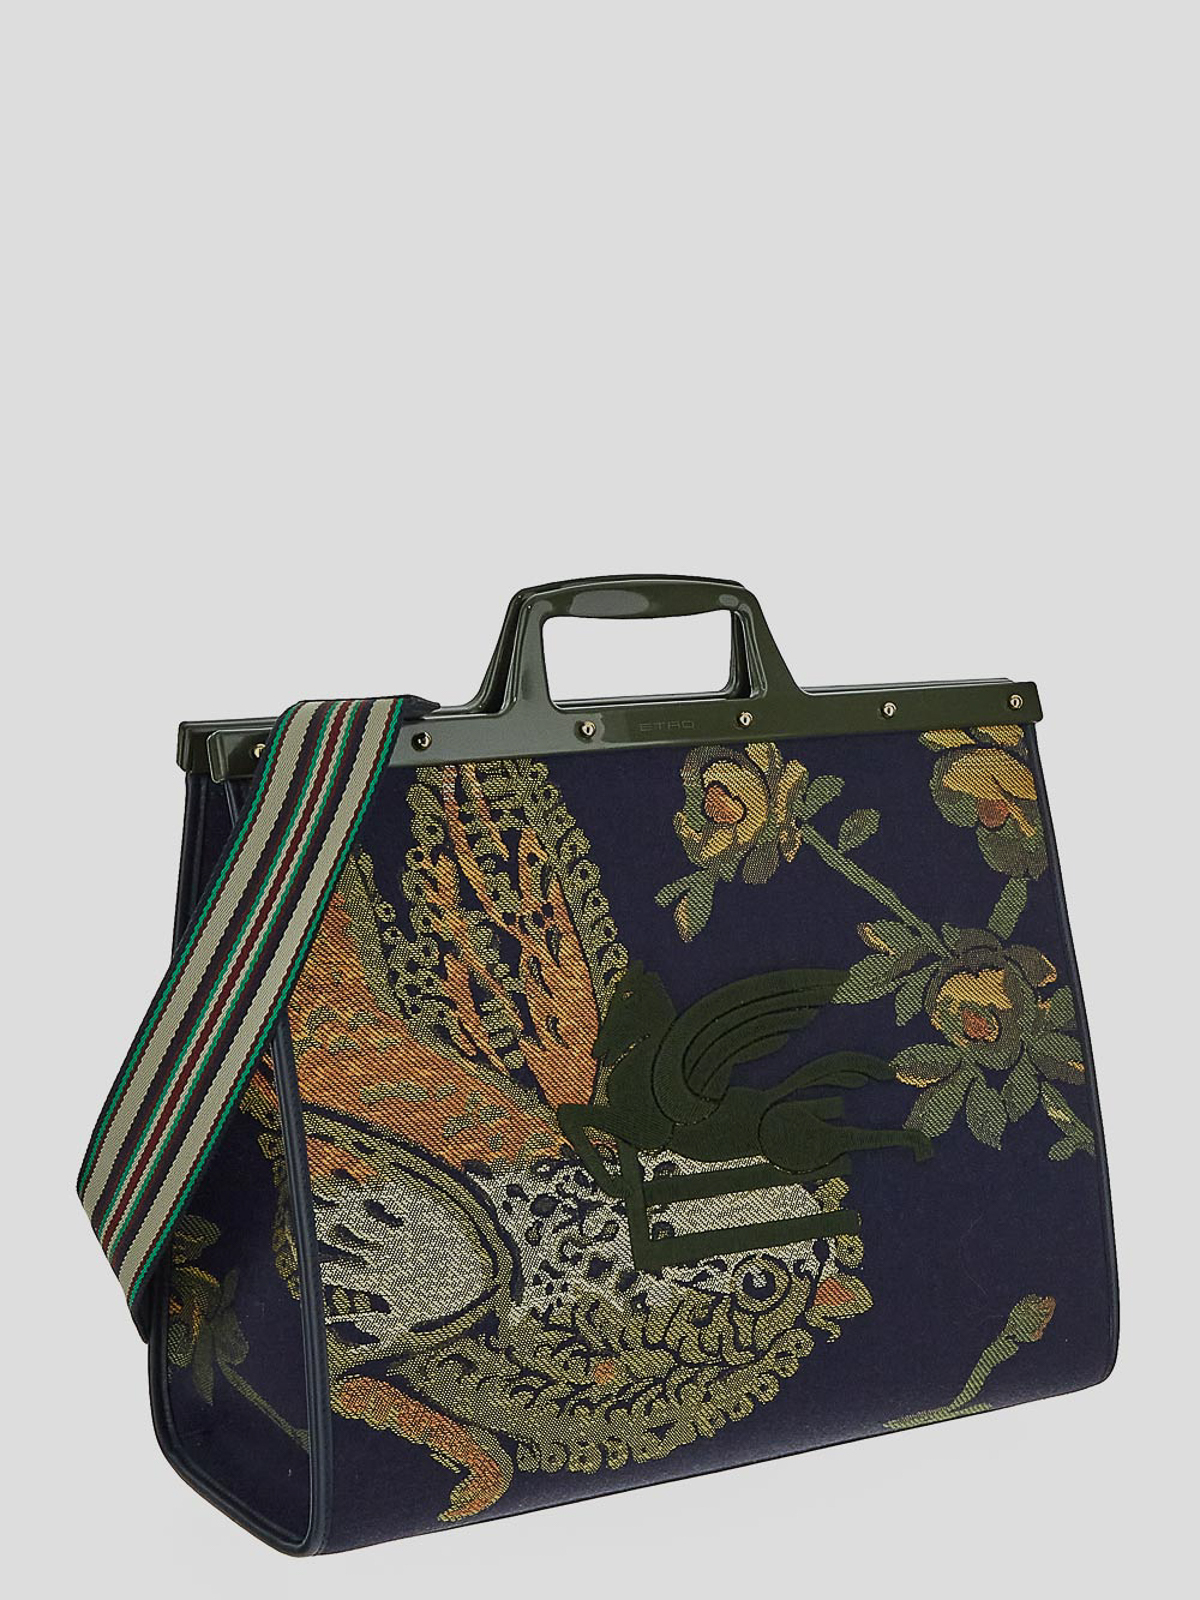 Totes bags Etro - Floral tote - 1P02475810202 | thebs.com [ikrix.com]